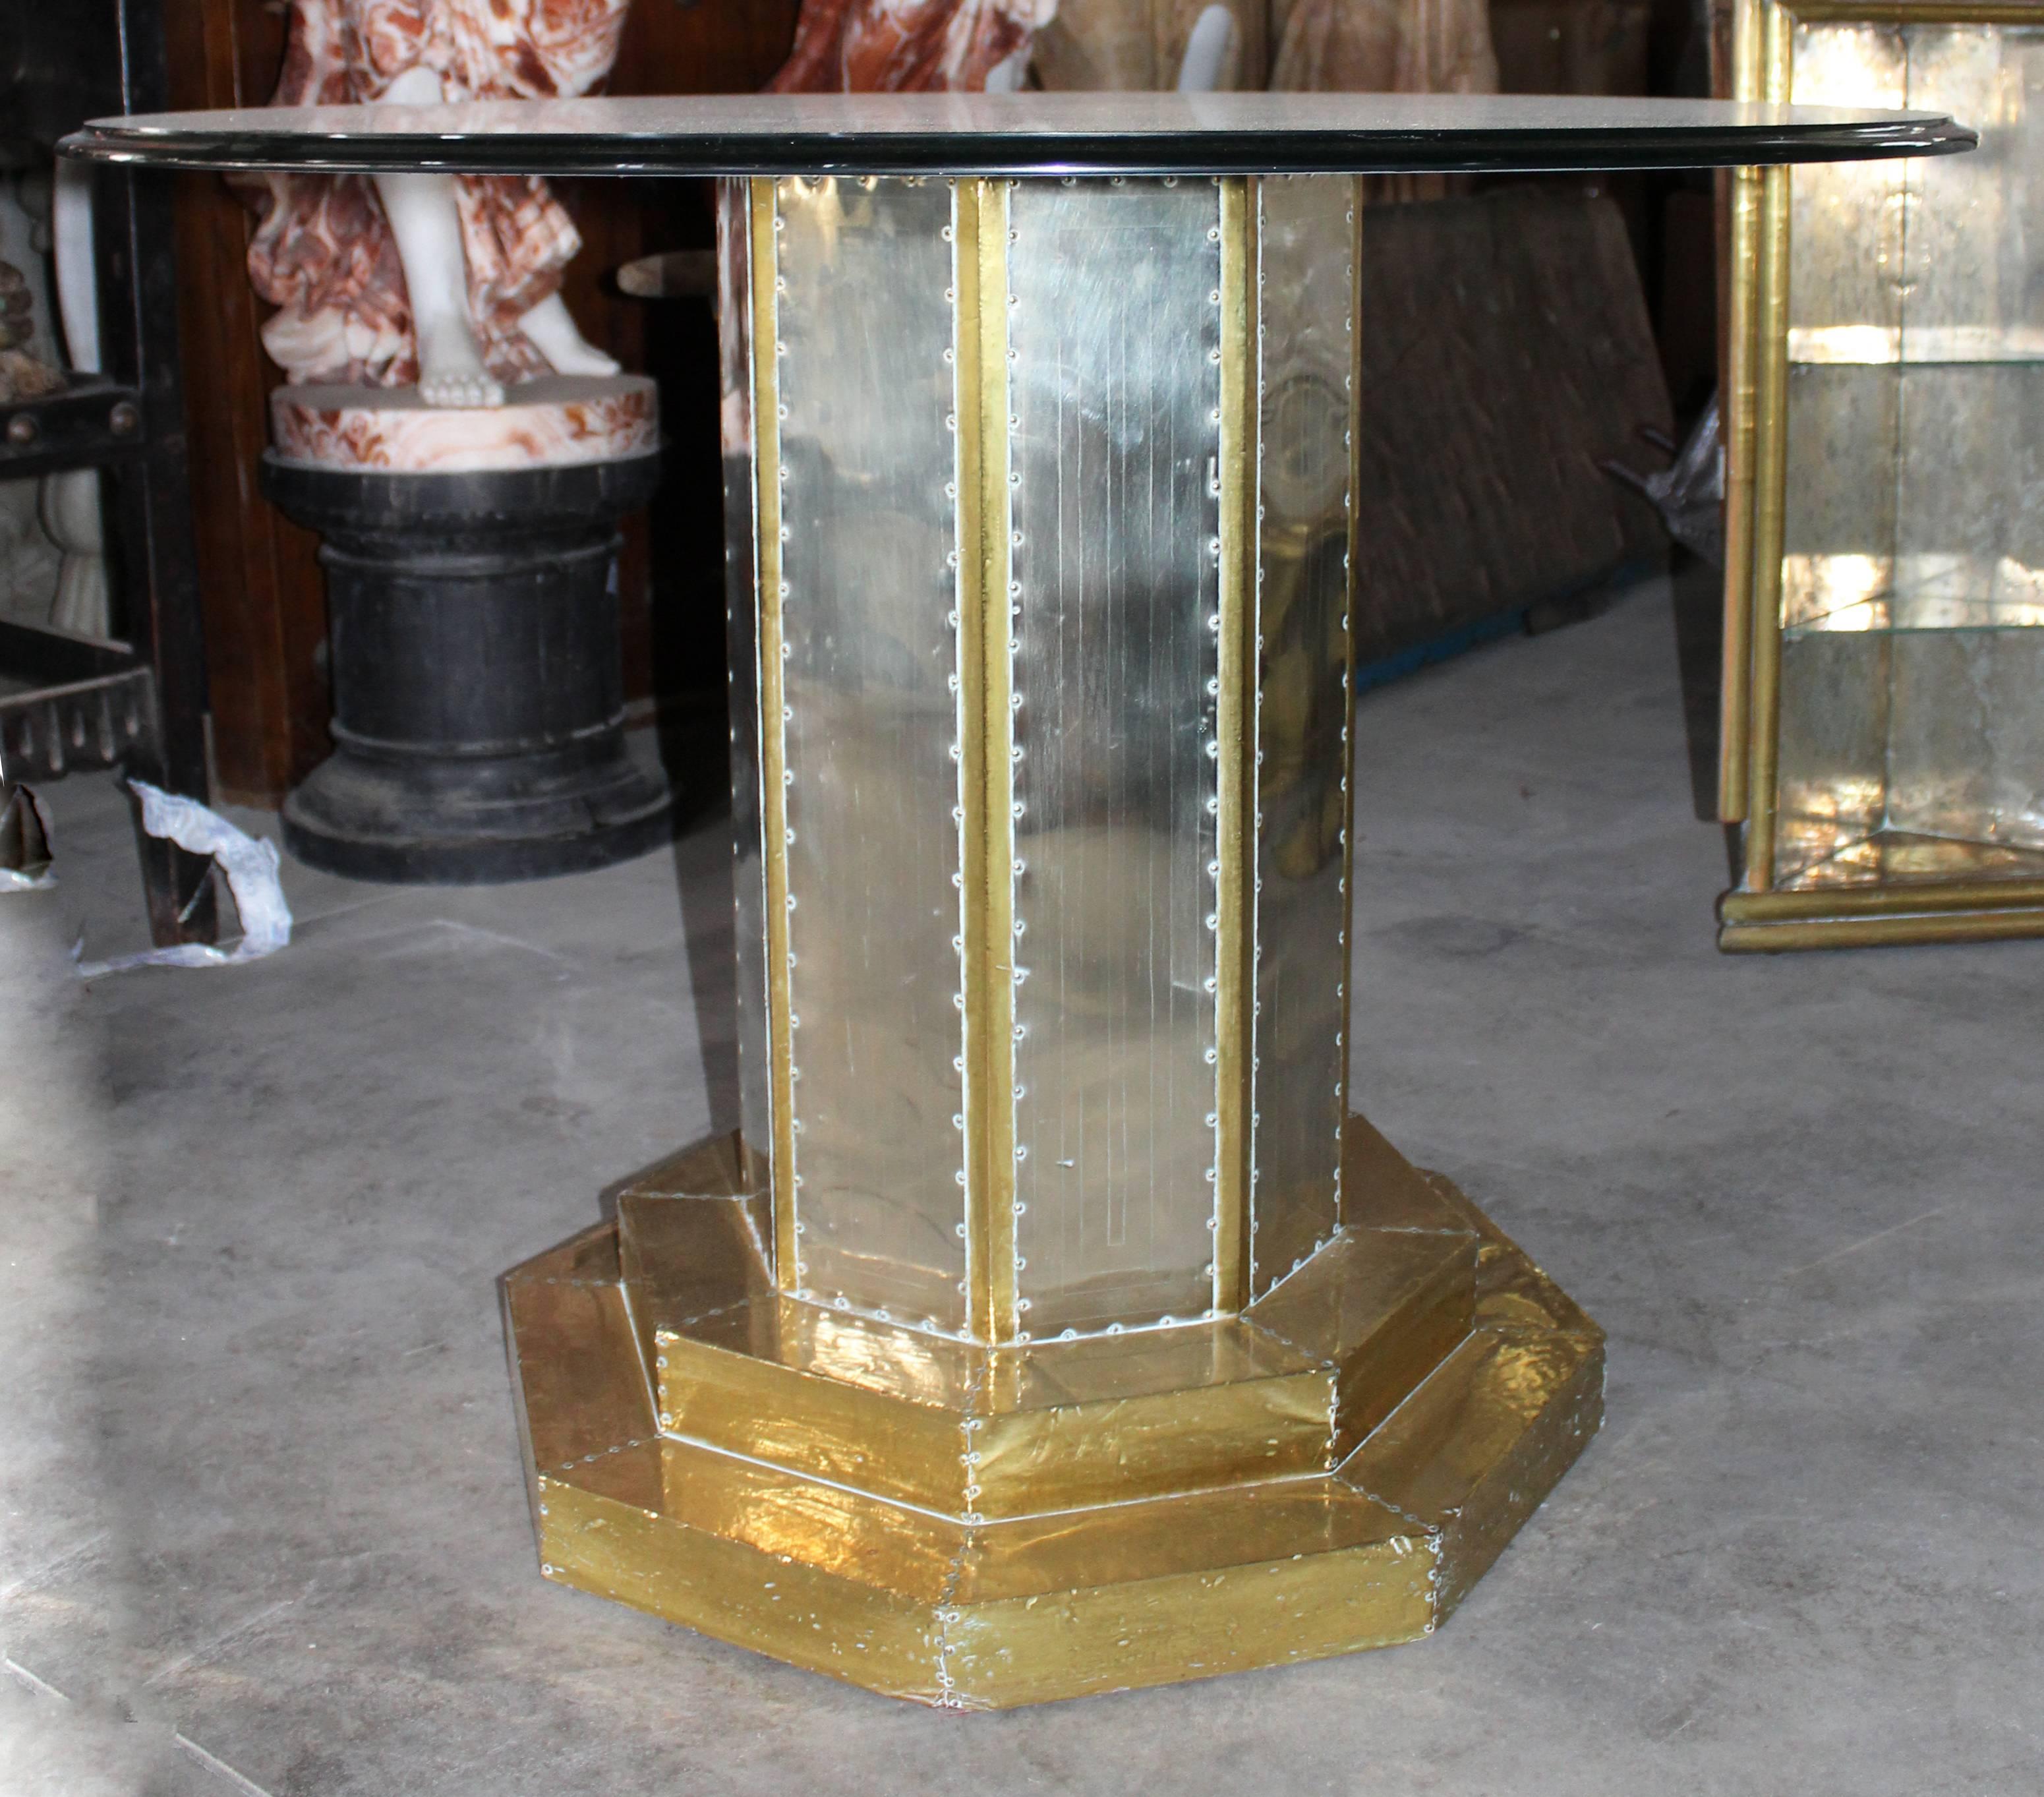 1970s Two-tone gilded brass on wood designer glass top table from Marbella, Spain. A time when the Argentinian furniture designer Rodolfo Dubarry set up a workshop in Marbella and popularised the use of gilded brass with a mix of European and